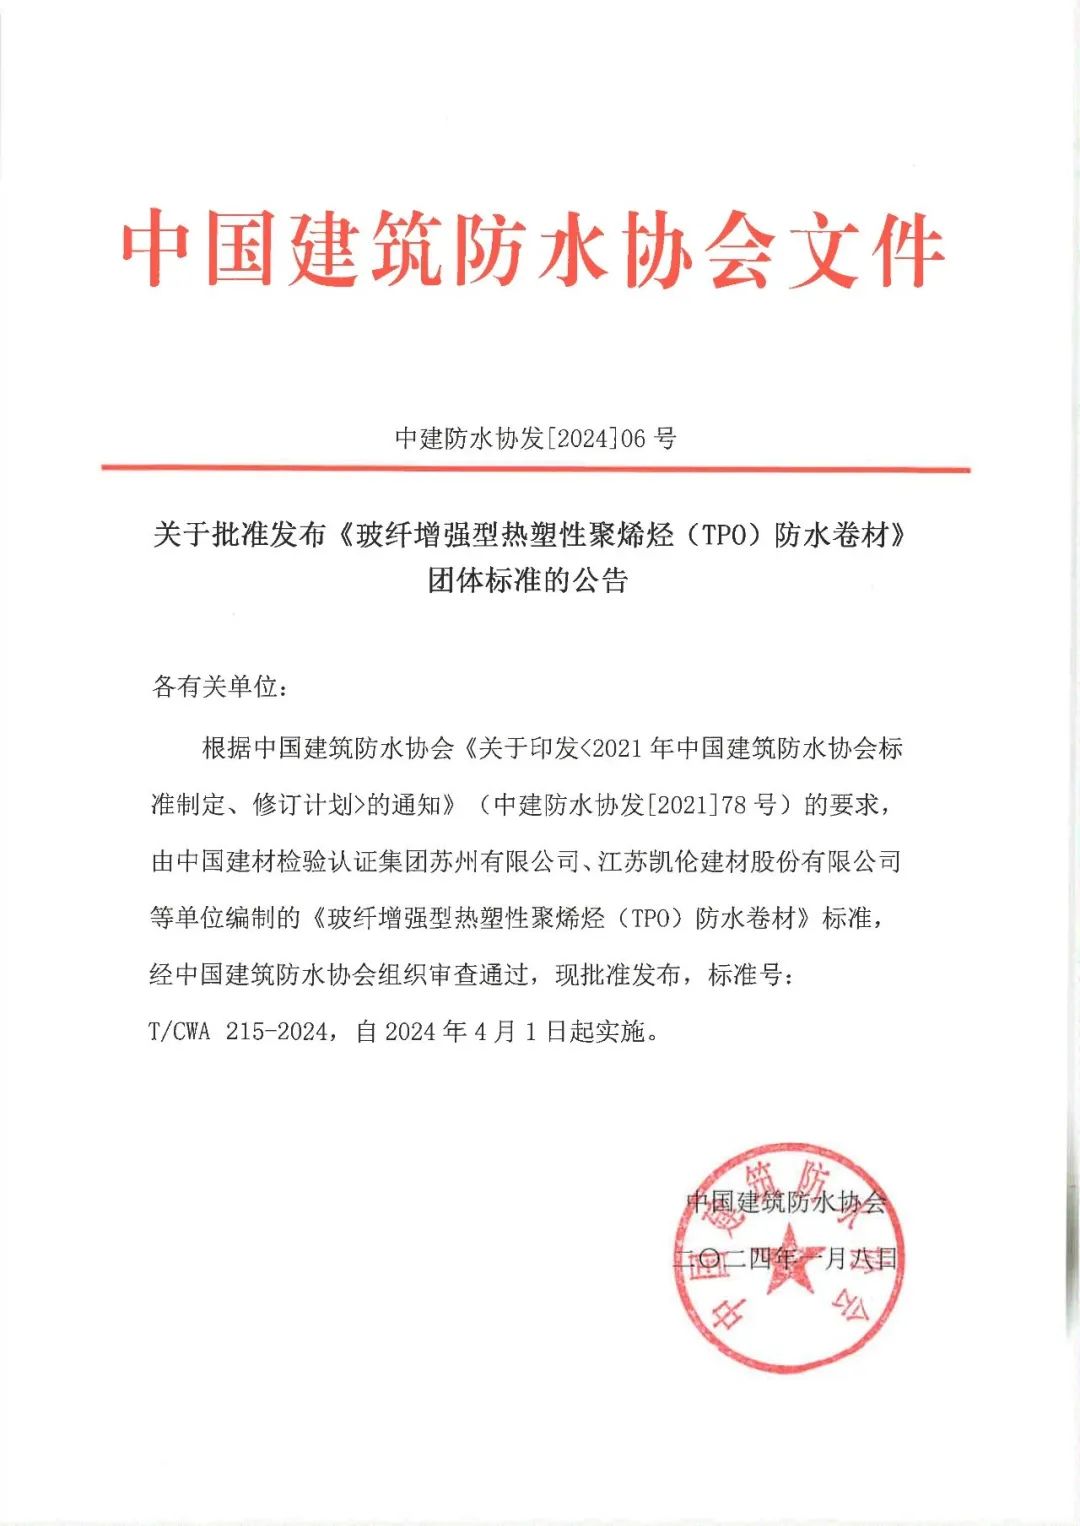 "Glass Fiber Reinforced Thermoplastic Polyolefin (TPO) Waterproofing Membrane" T/CWA 215-2024 group standard edited by CANLON was officially approved and will be implemented on April 1, 2024.